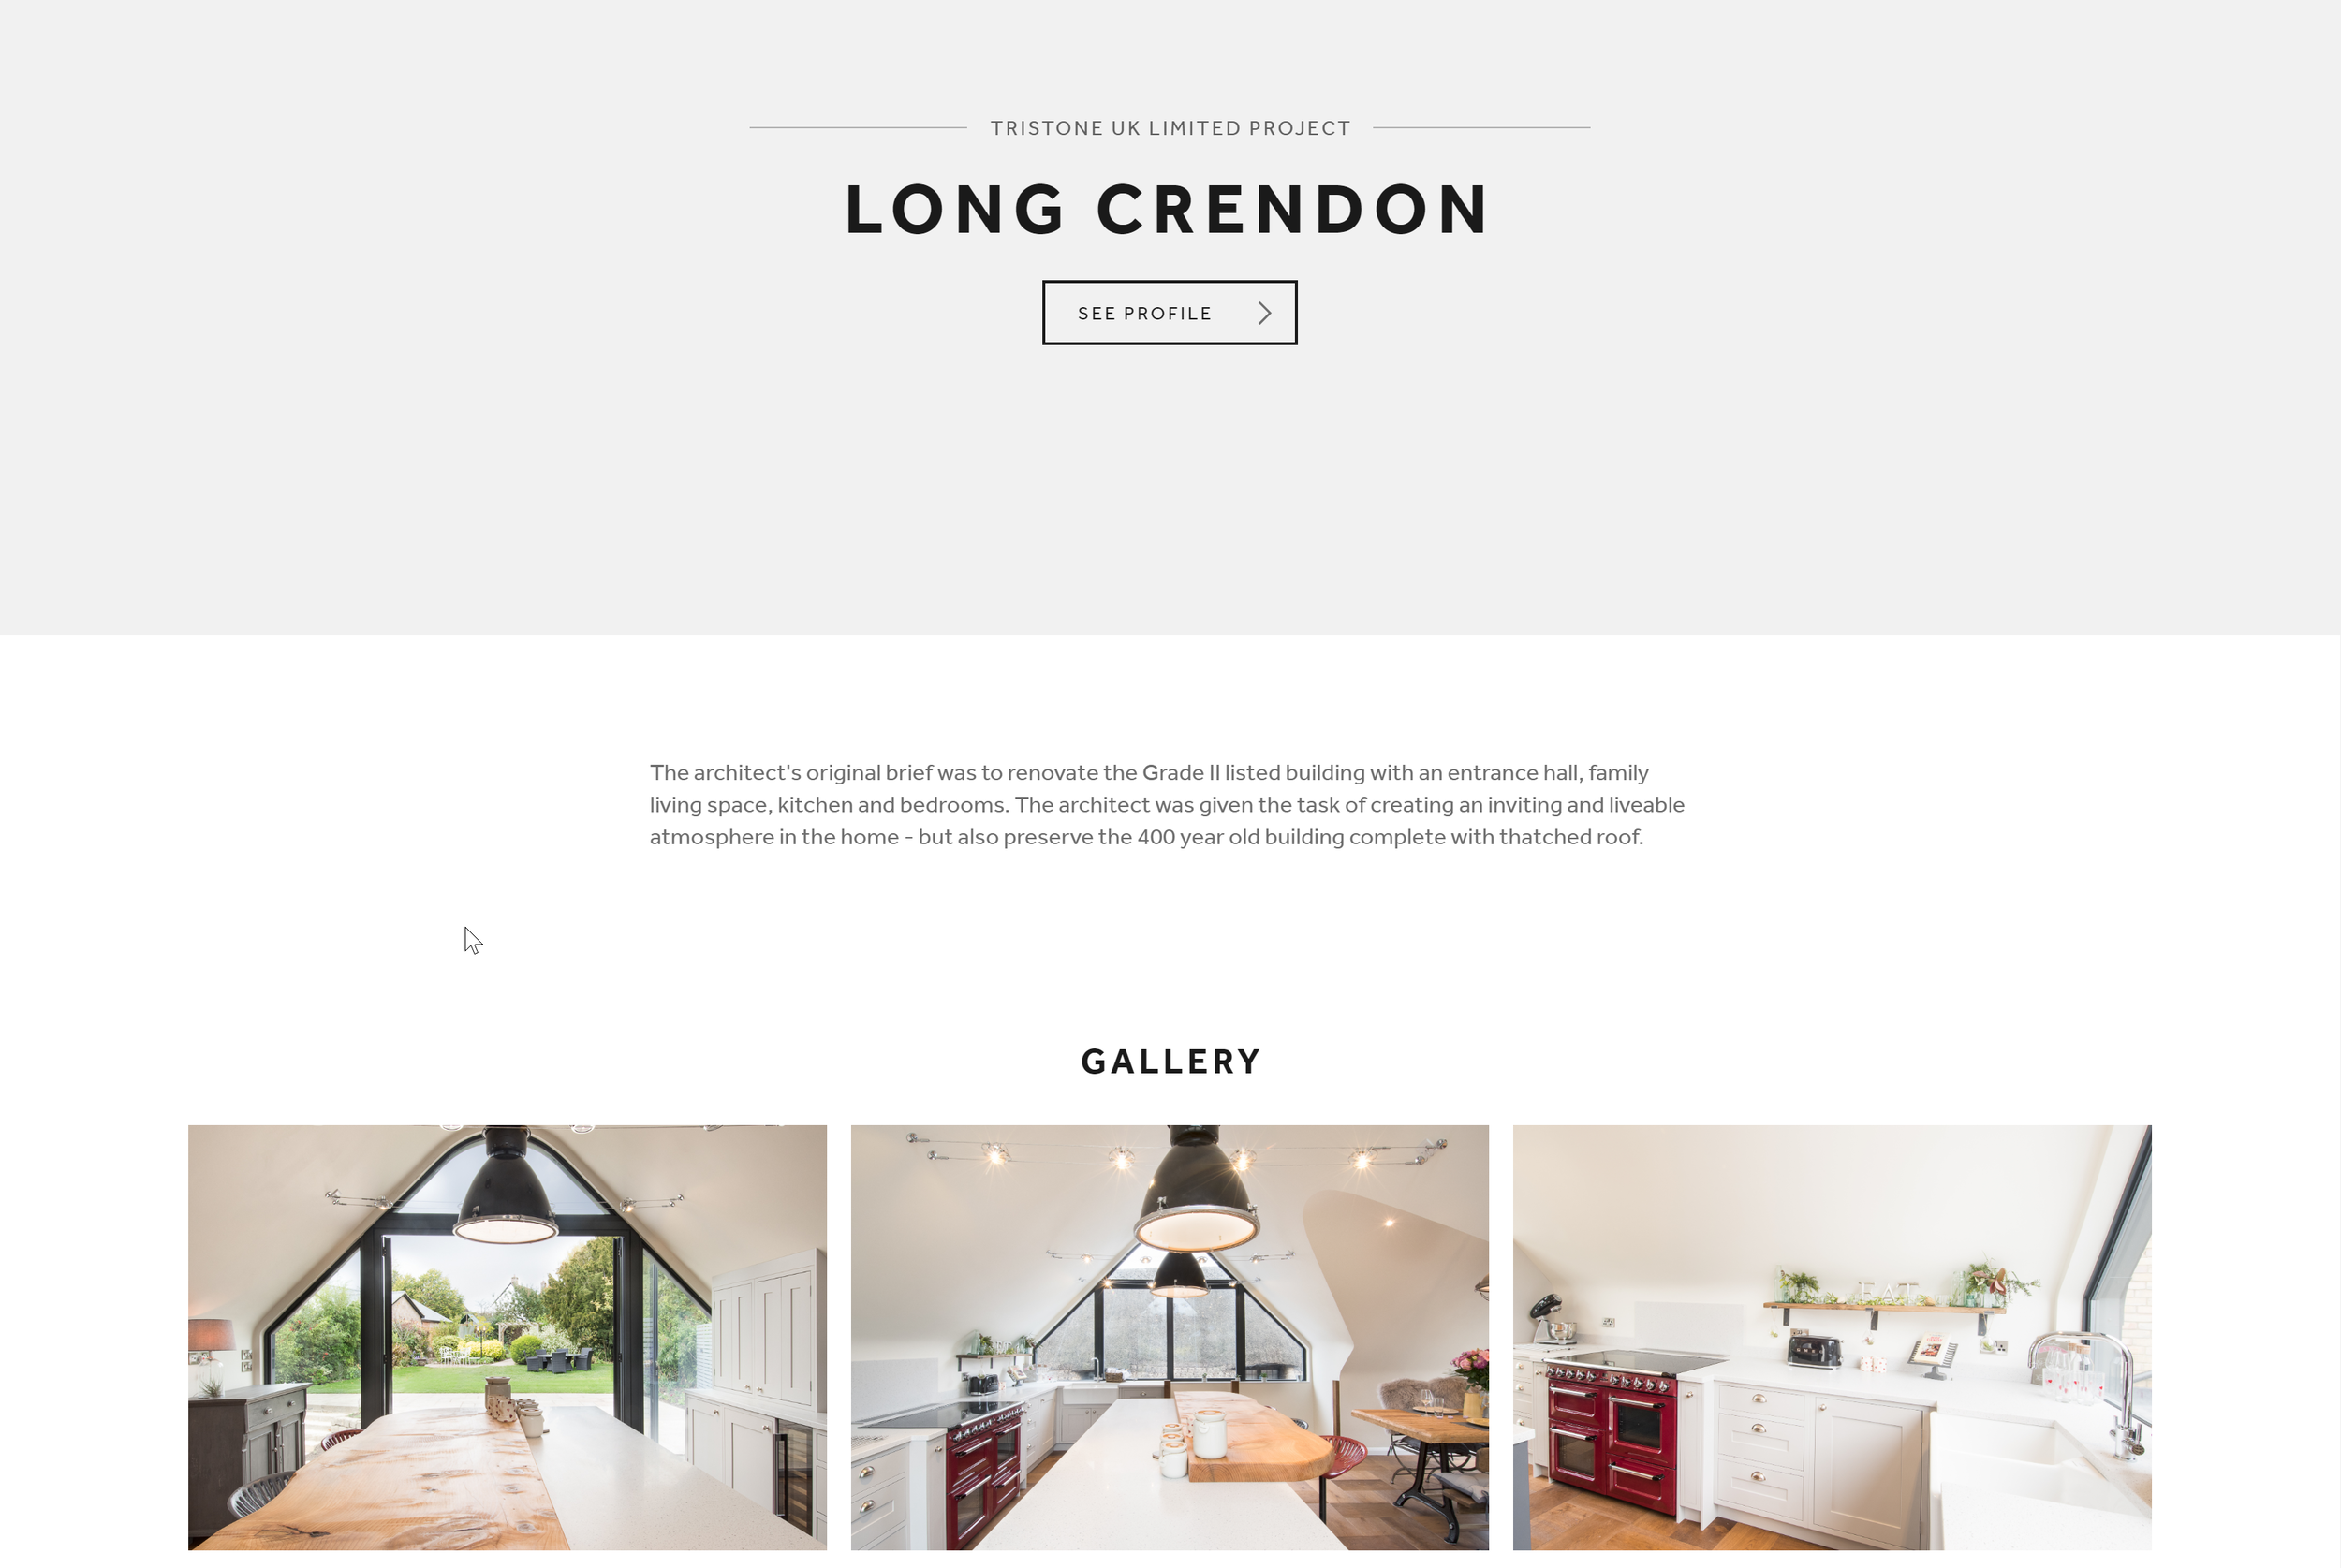 2019-11-20 14_51_24-Long Crendon _ British Institute of Interior Design and 6 more pages - Personal .png